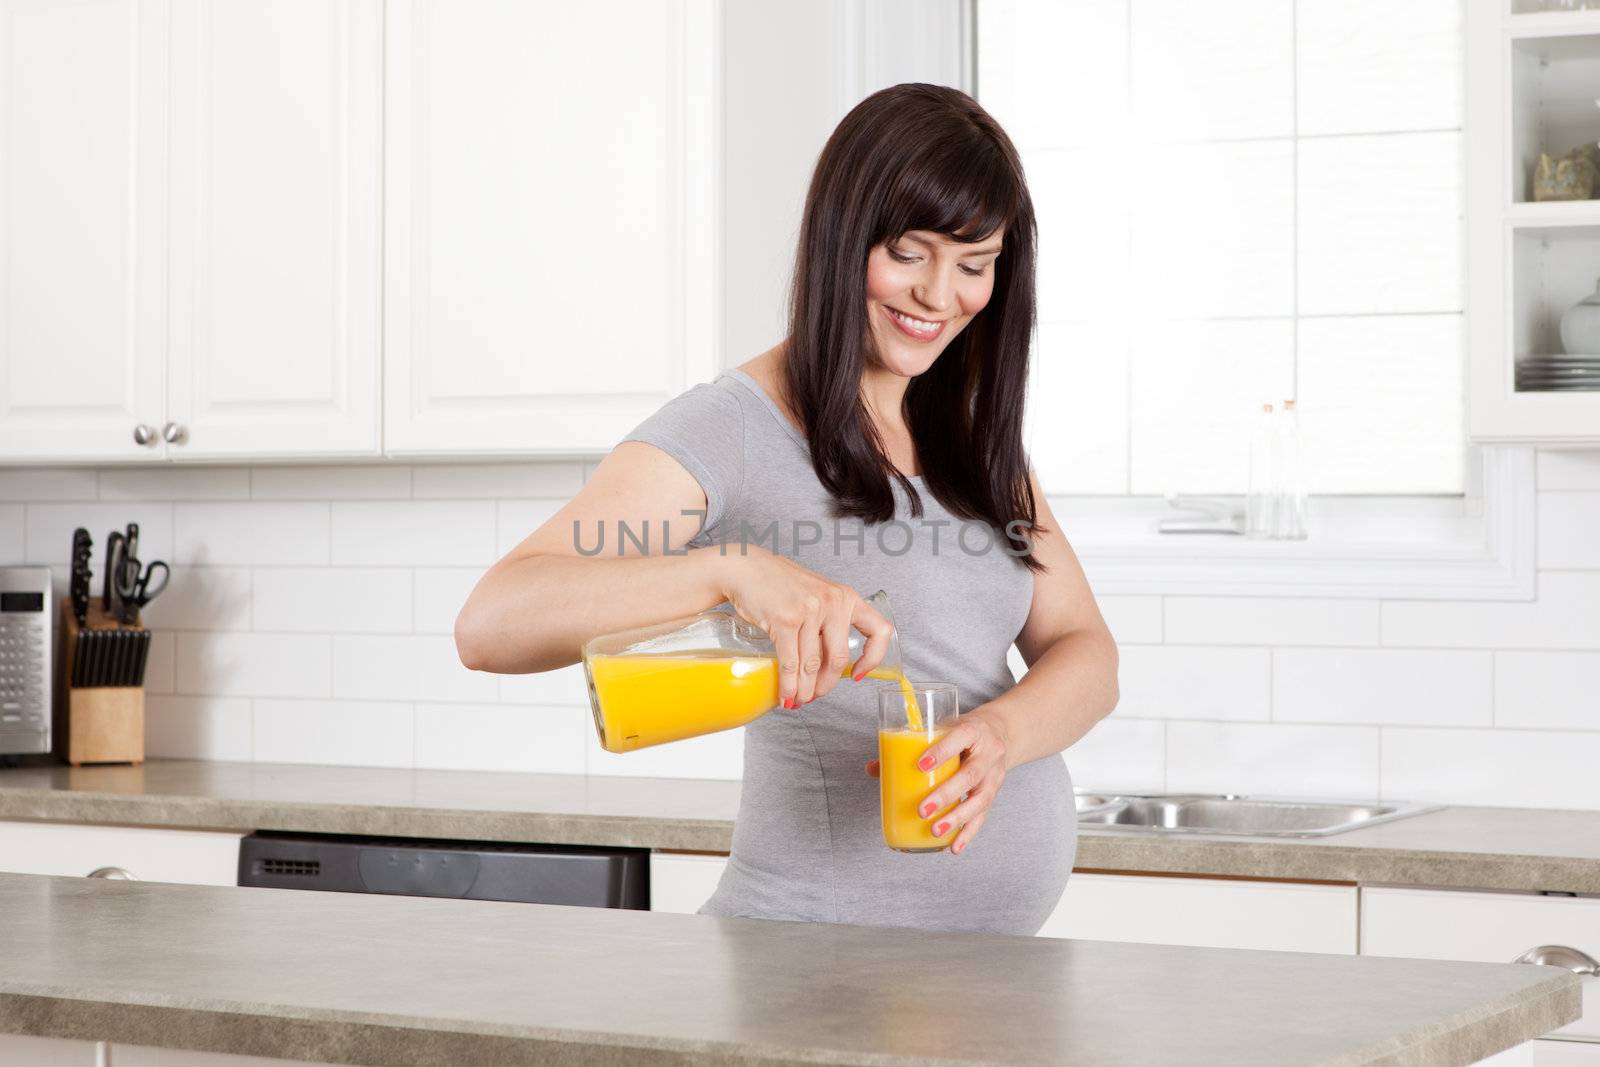 Pregnant woman pouring glass of orange juice in kitchen